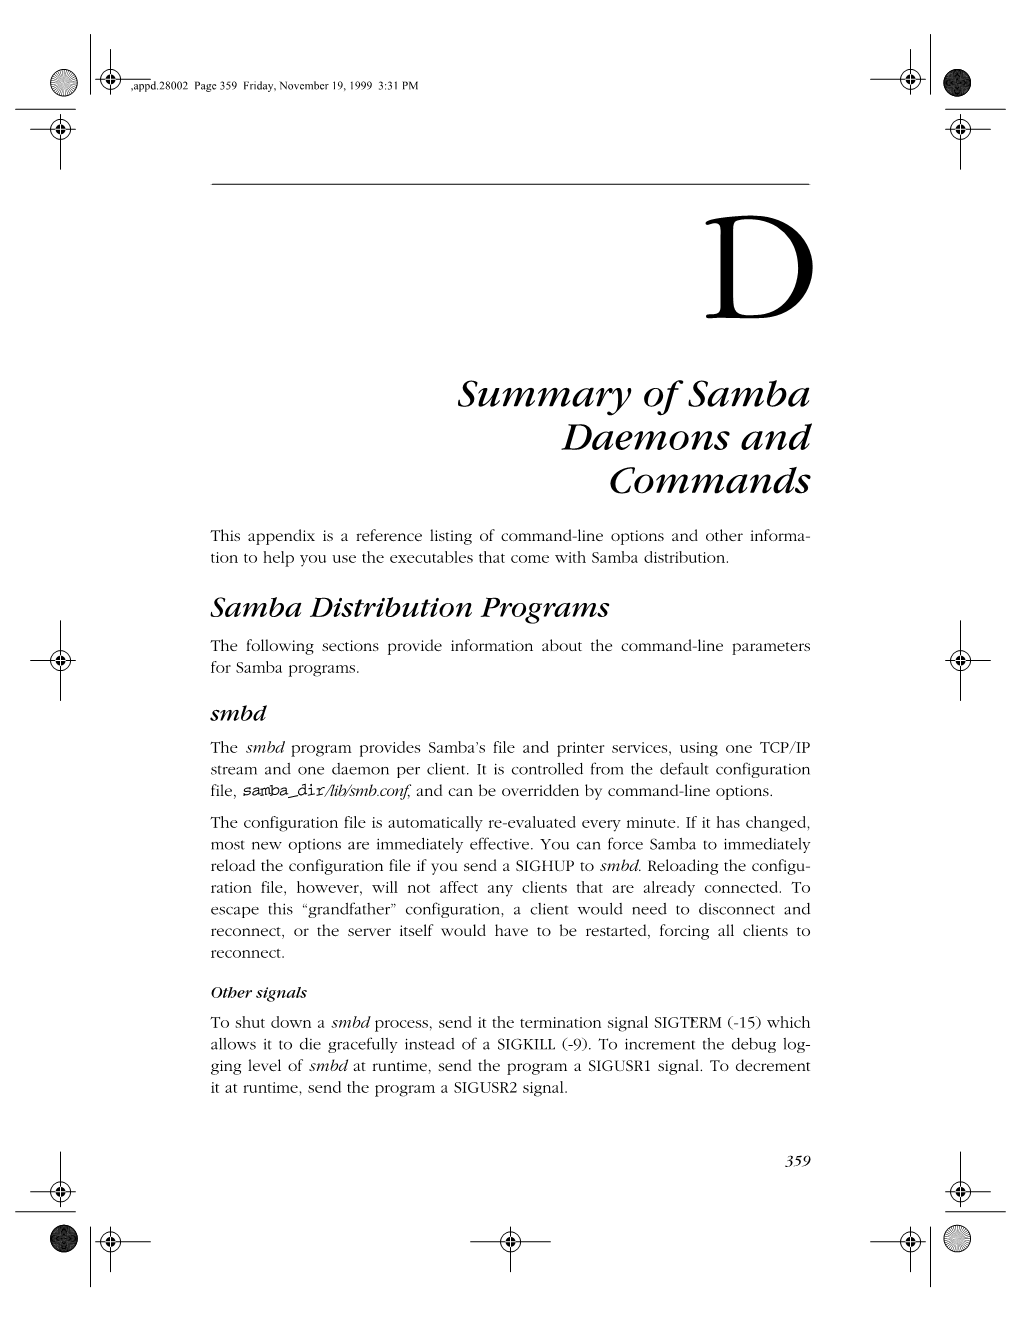 Appendix D: Summary of Samba Daemons and Commands